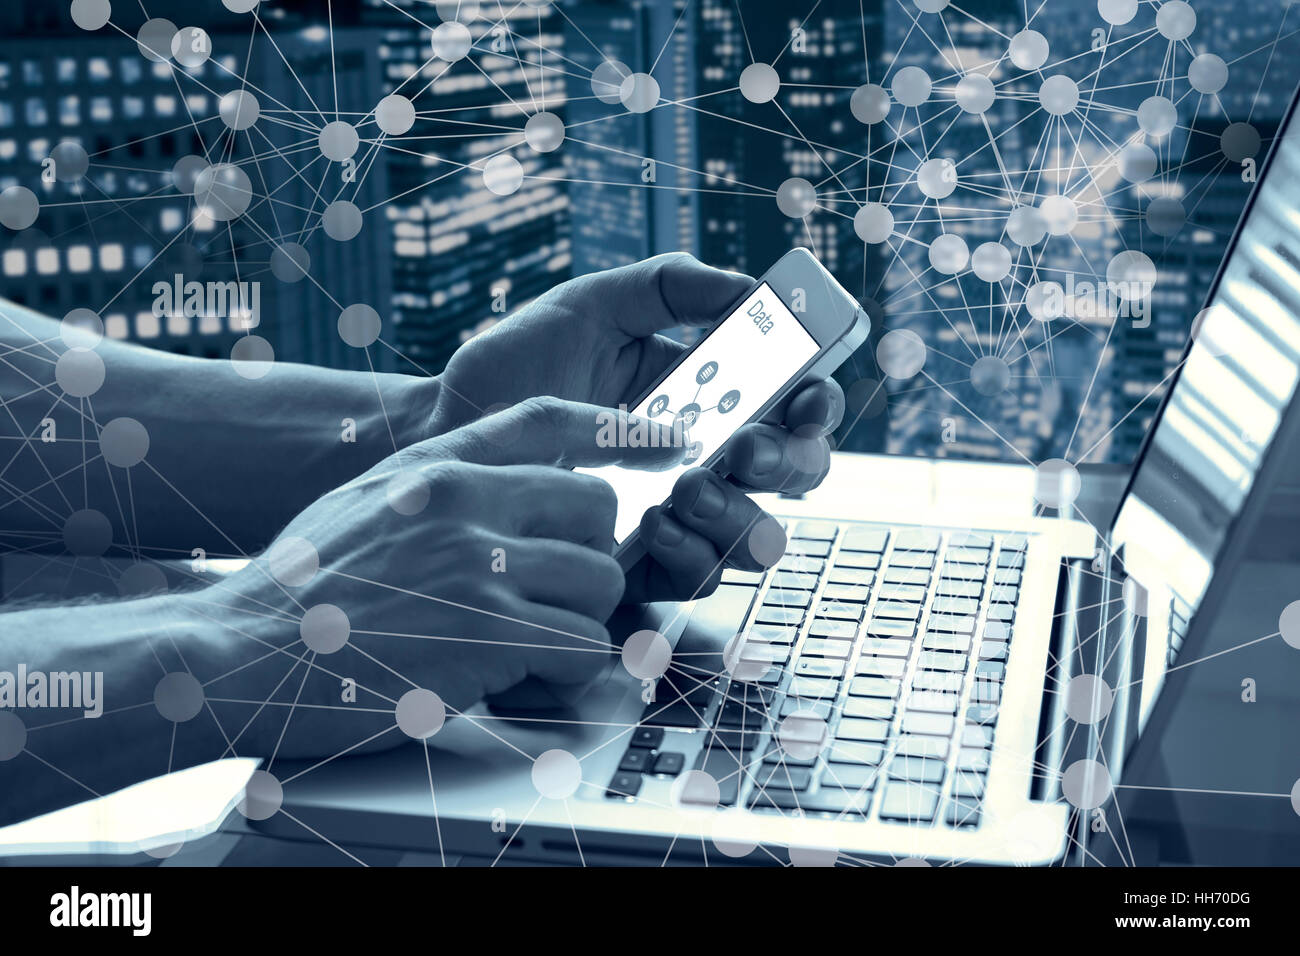 Data and modern technology concept with a person touching a mobile phone screen and using a computer with abstract network diagram Stock Photo